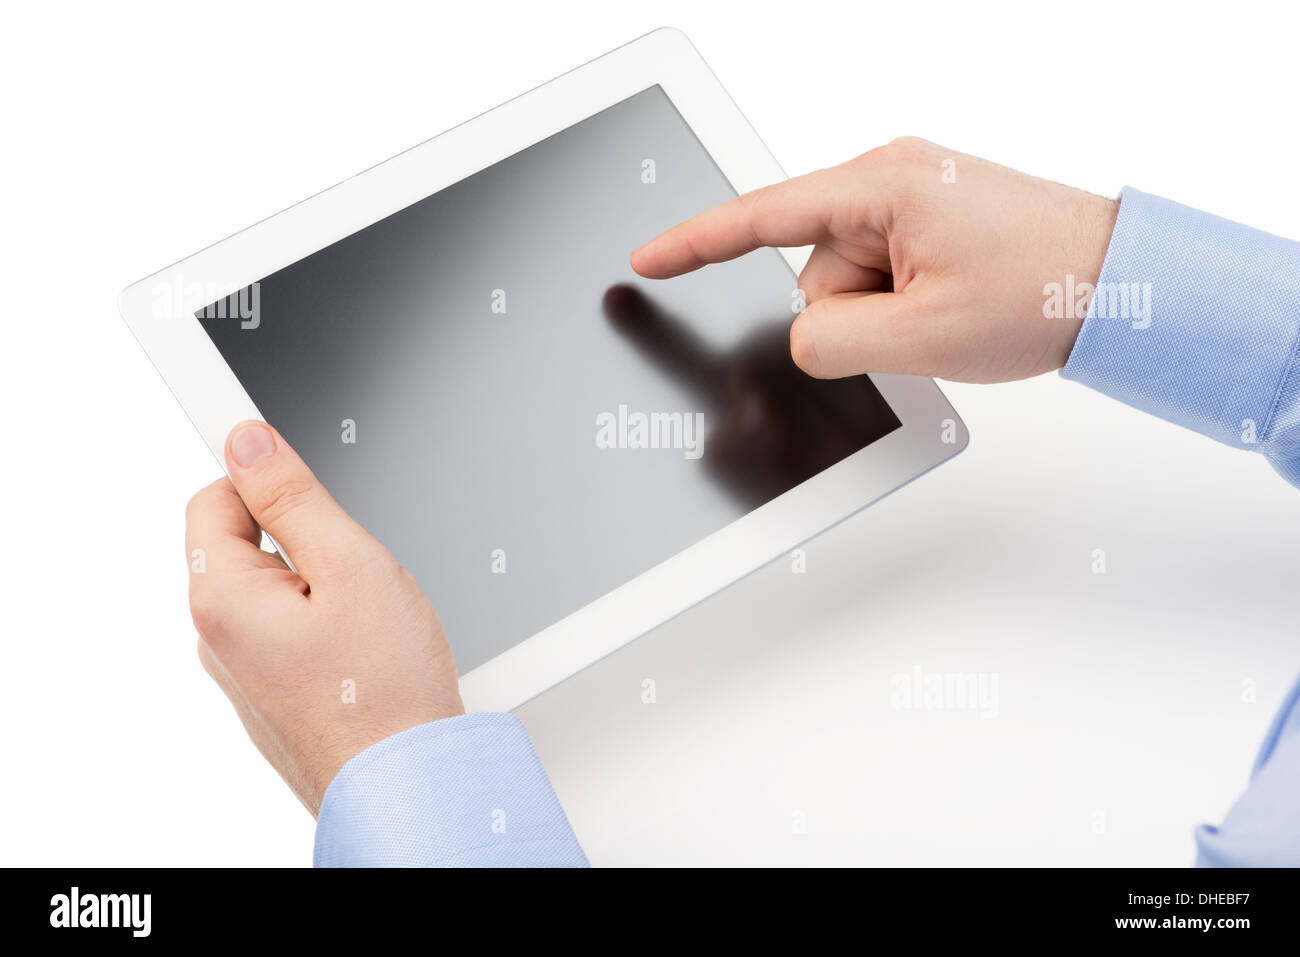 Man's hands are holding a tablet computer and points a finger at the screen on a white background. Stock Photo